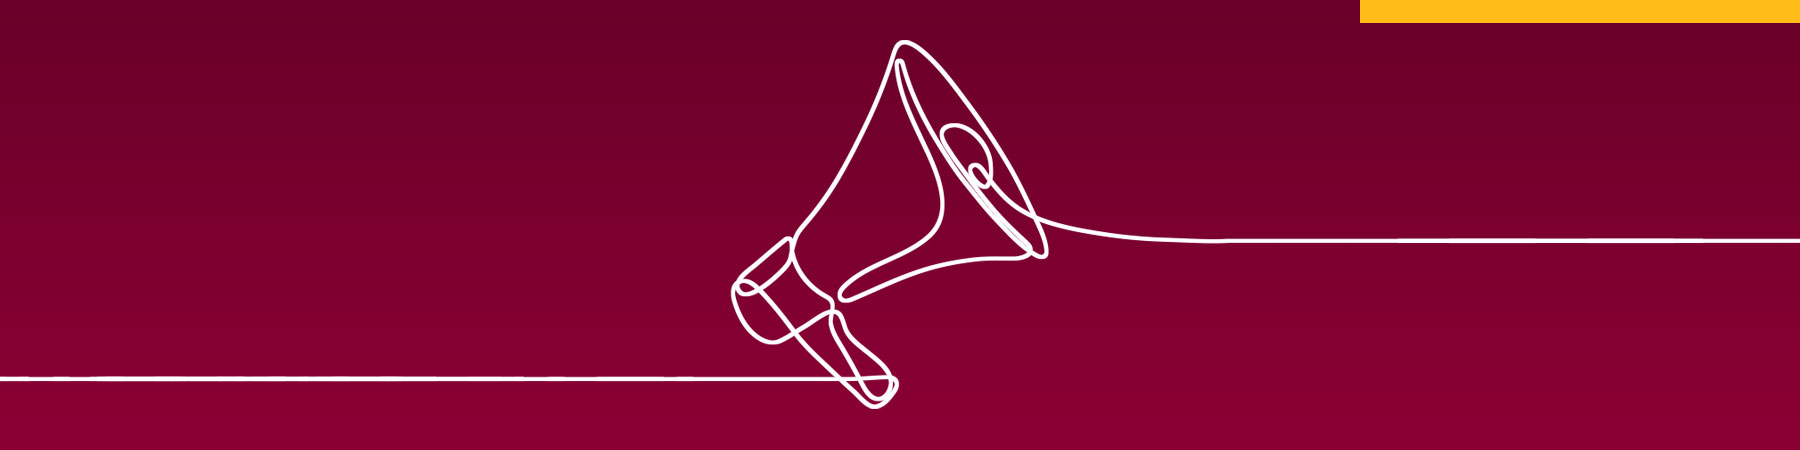 White line illustration of a megaphone, against a maroon background, to represent Loyola University Chicago's communications efforts.